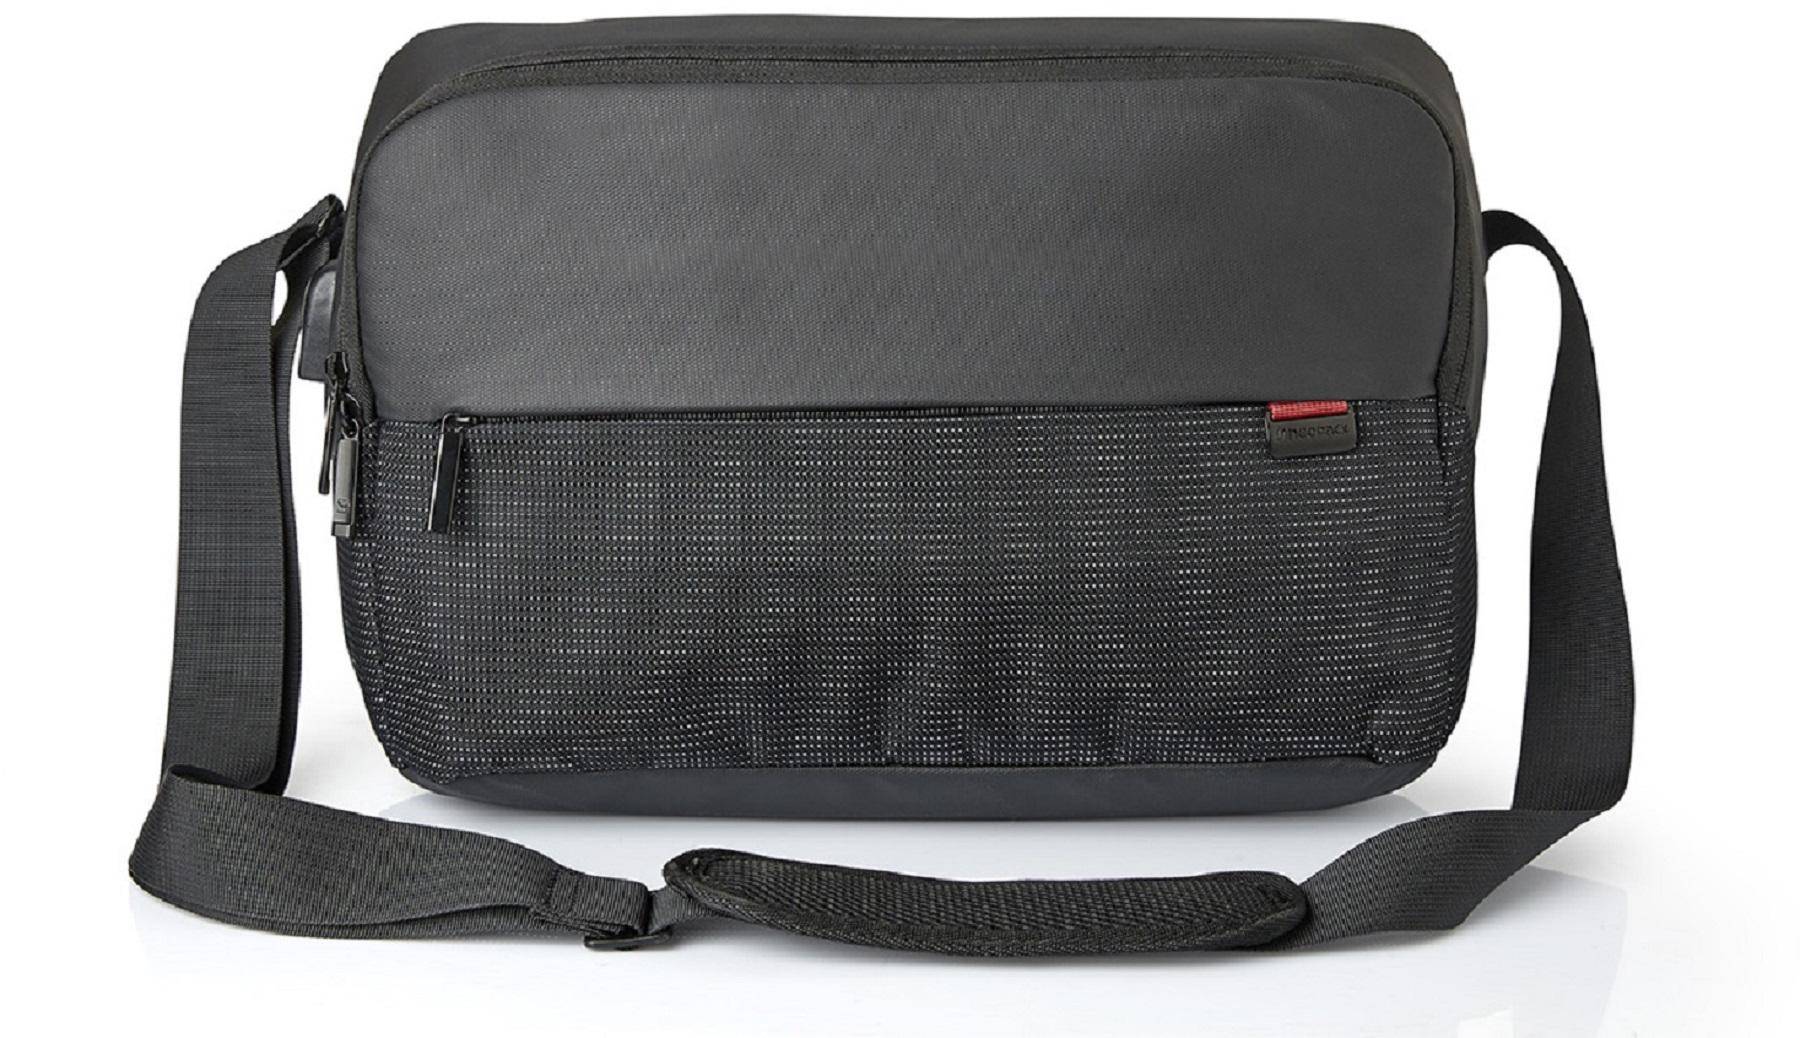 Neopack Bolt Messenger 13.3 inches bags for Laptops and Macbooks zoom image